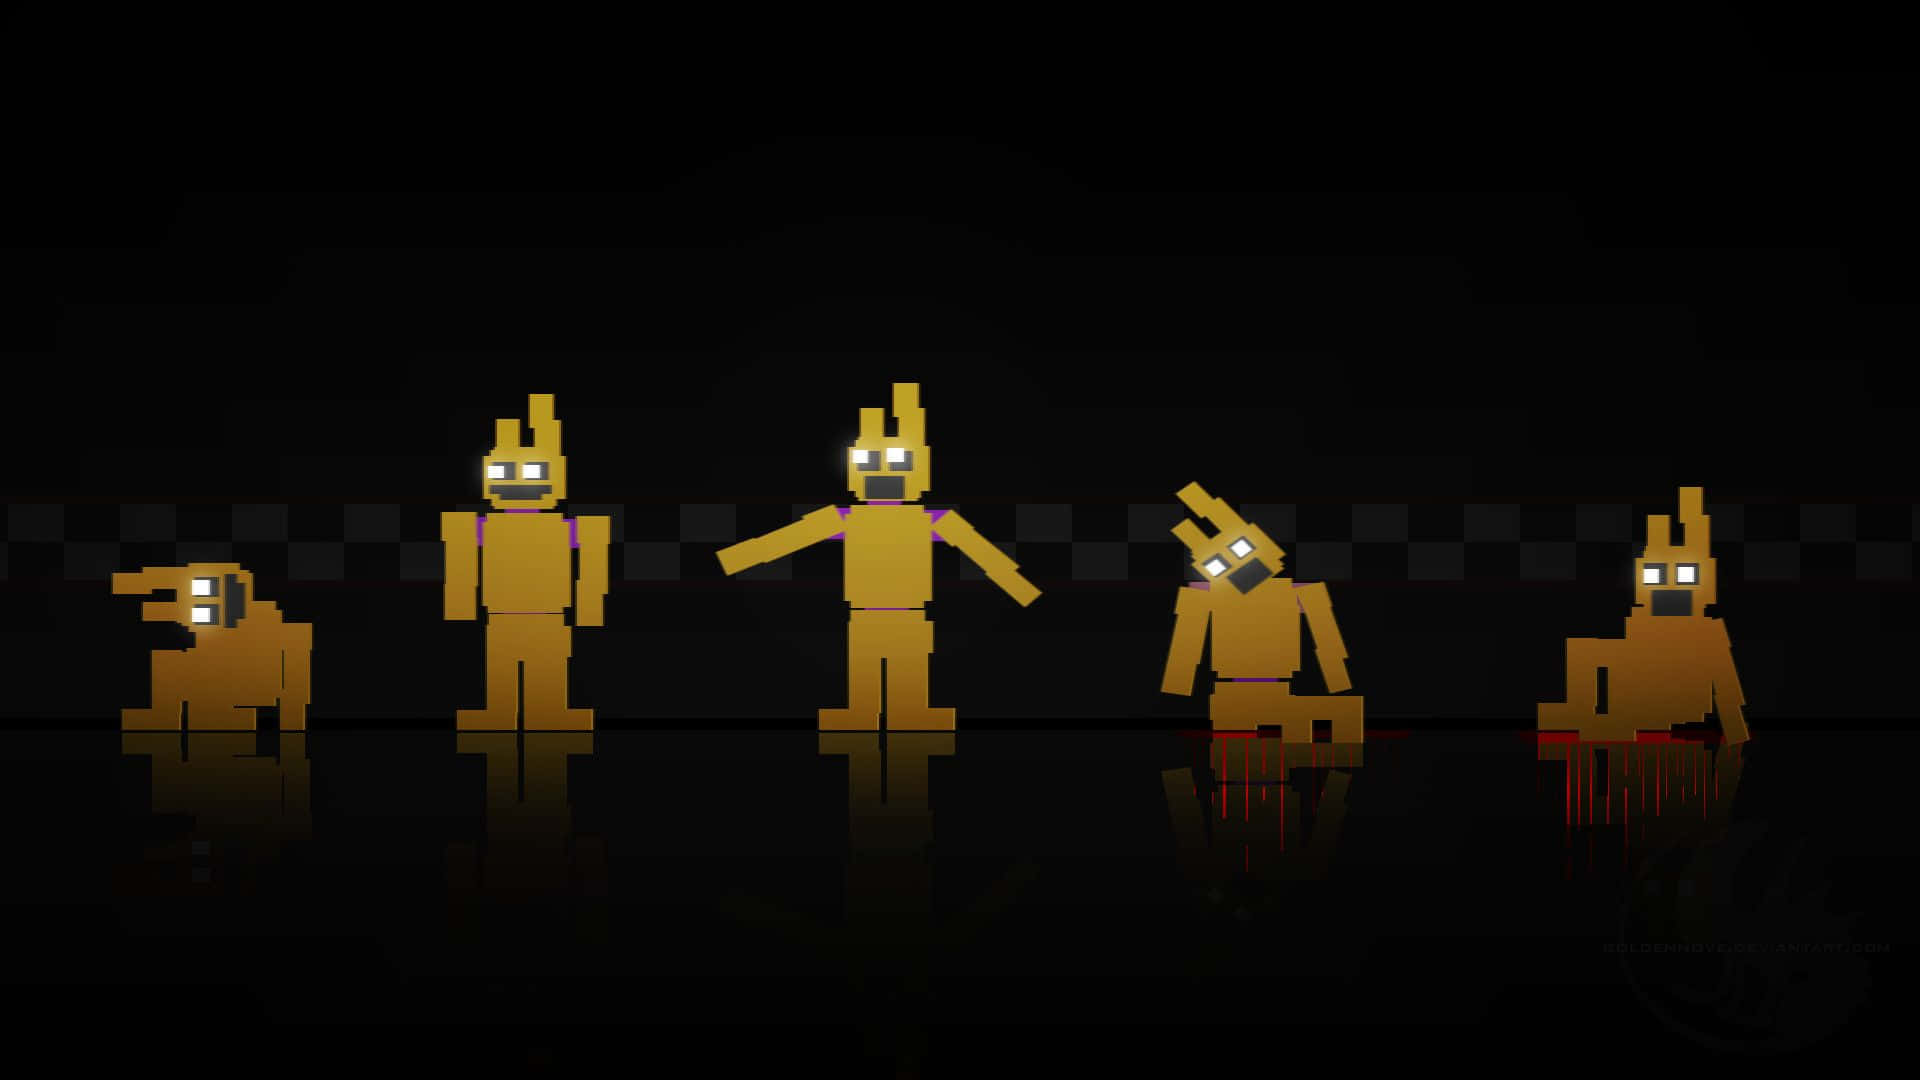 "Don't be scared of the jump scares in Five Nights At Freddys!" Wallpaper